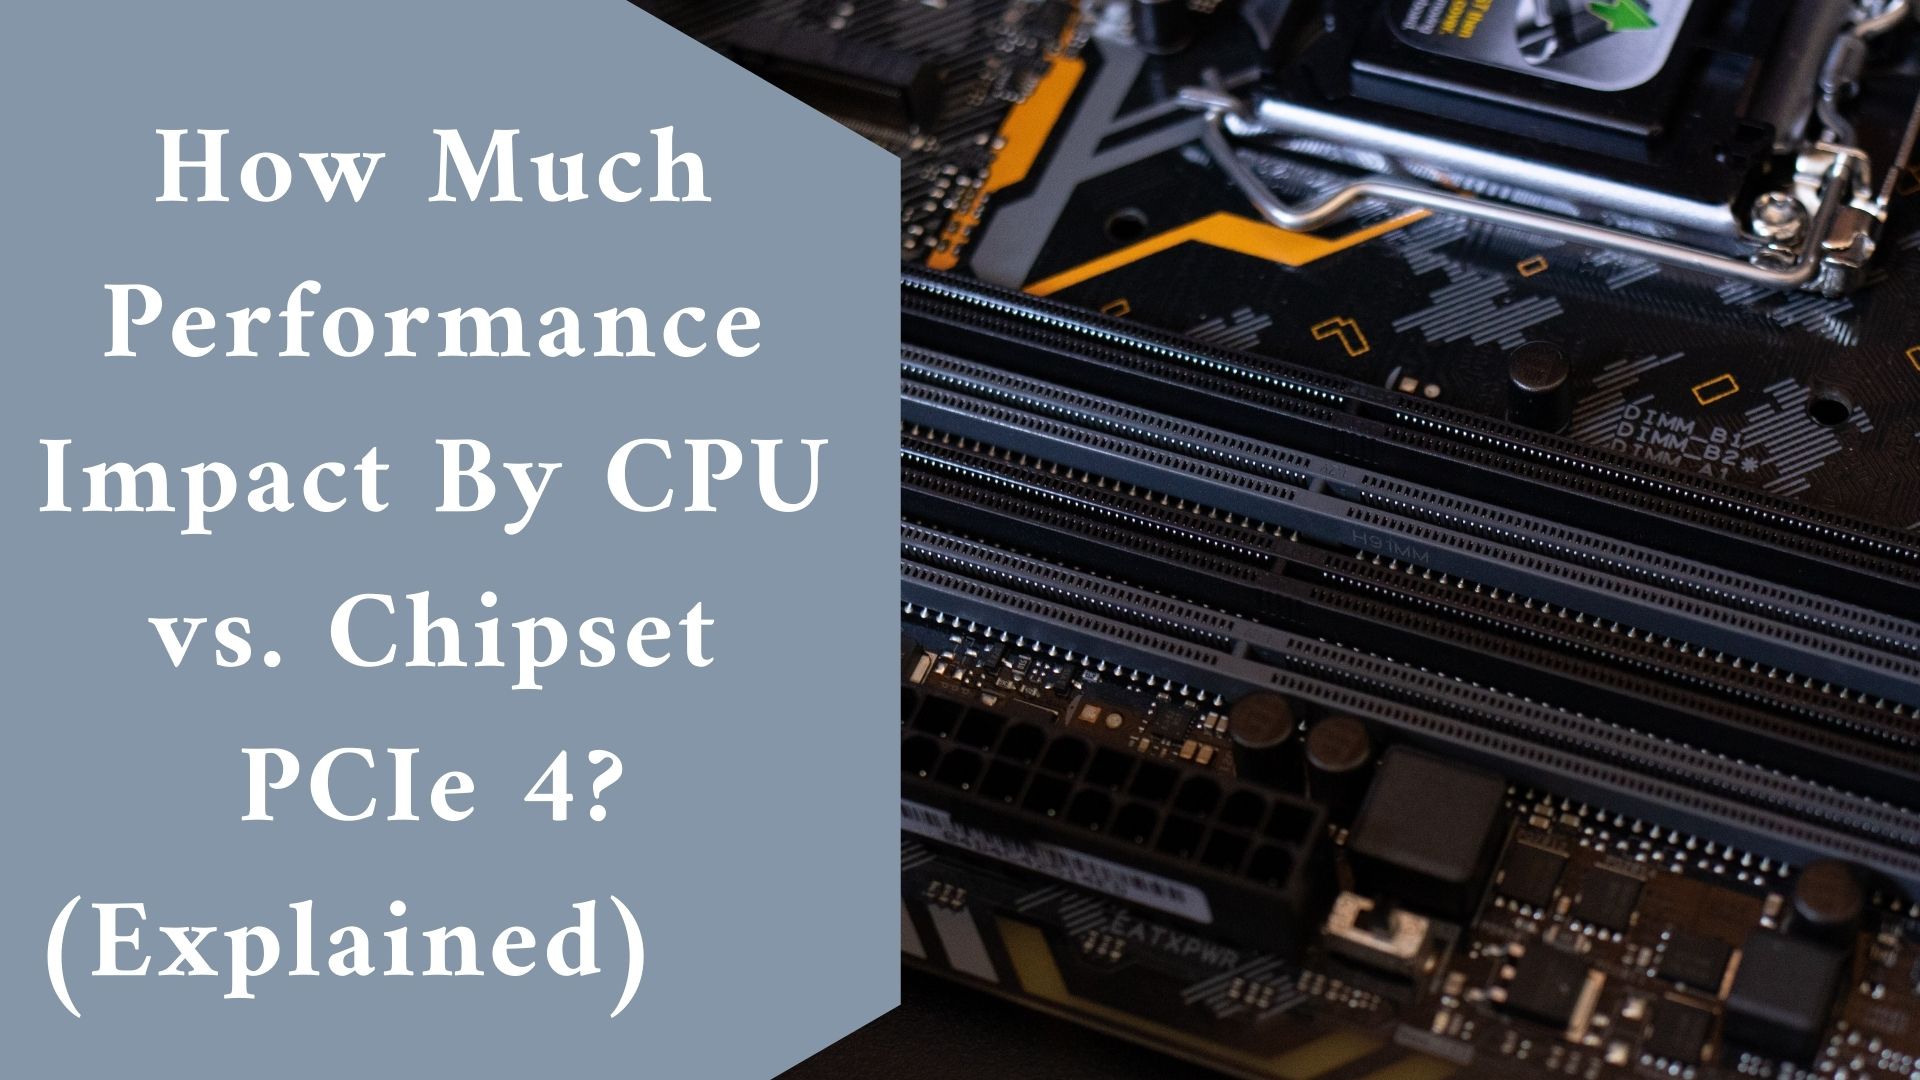 How Much Performance Impact By CPU vs. Chipset PCIe 4? (Explained)